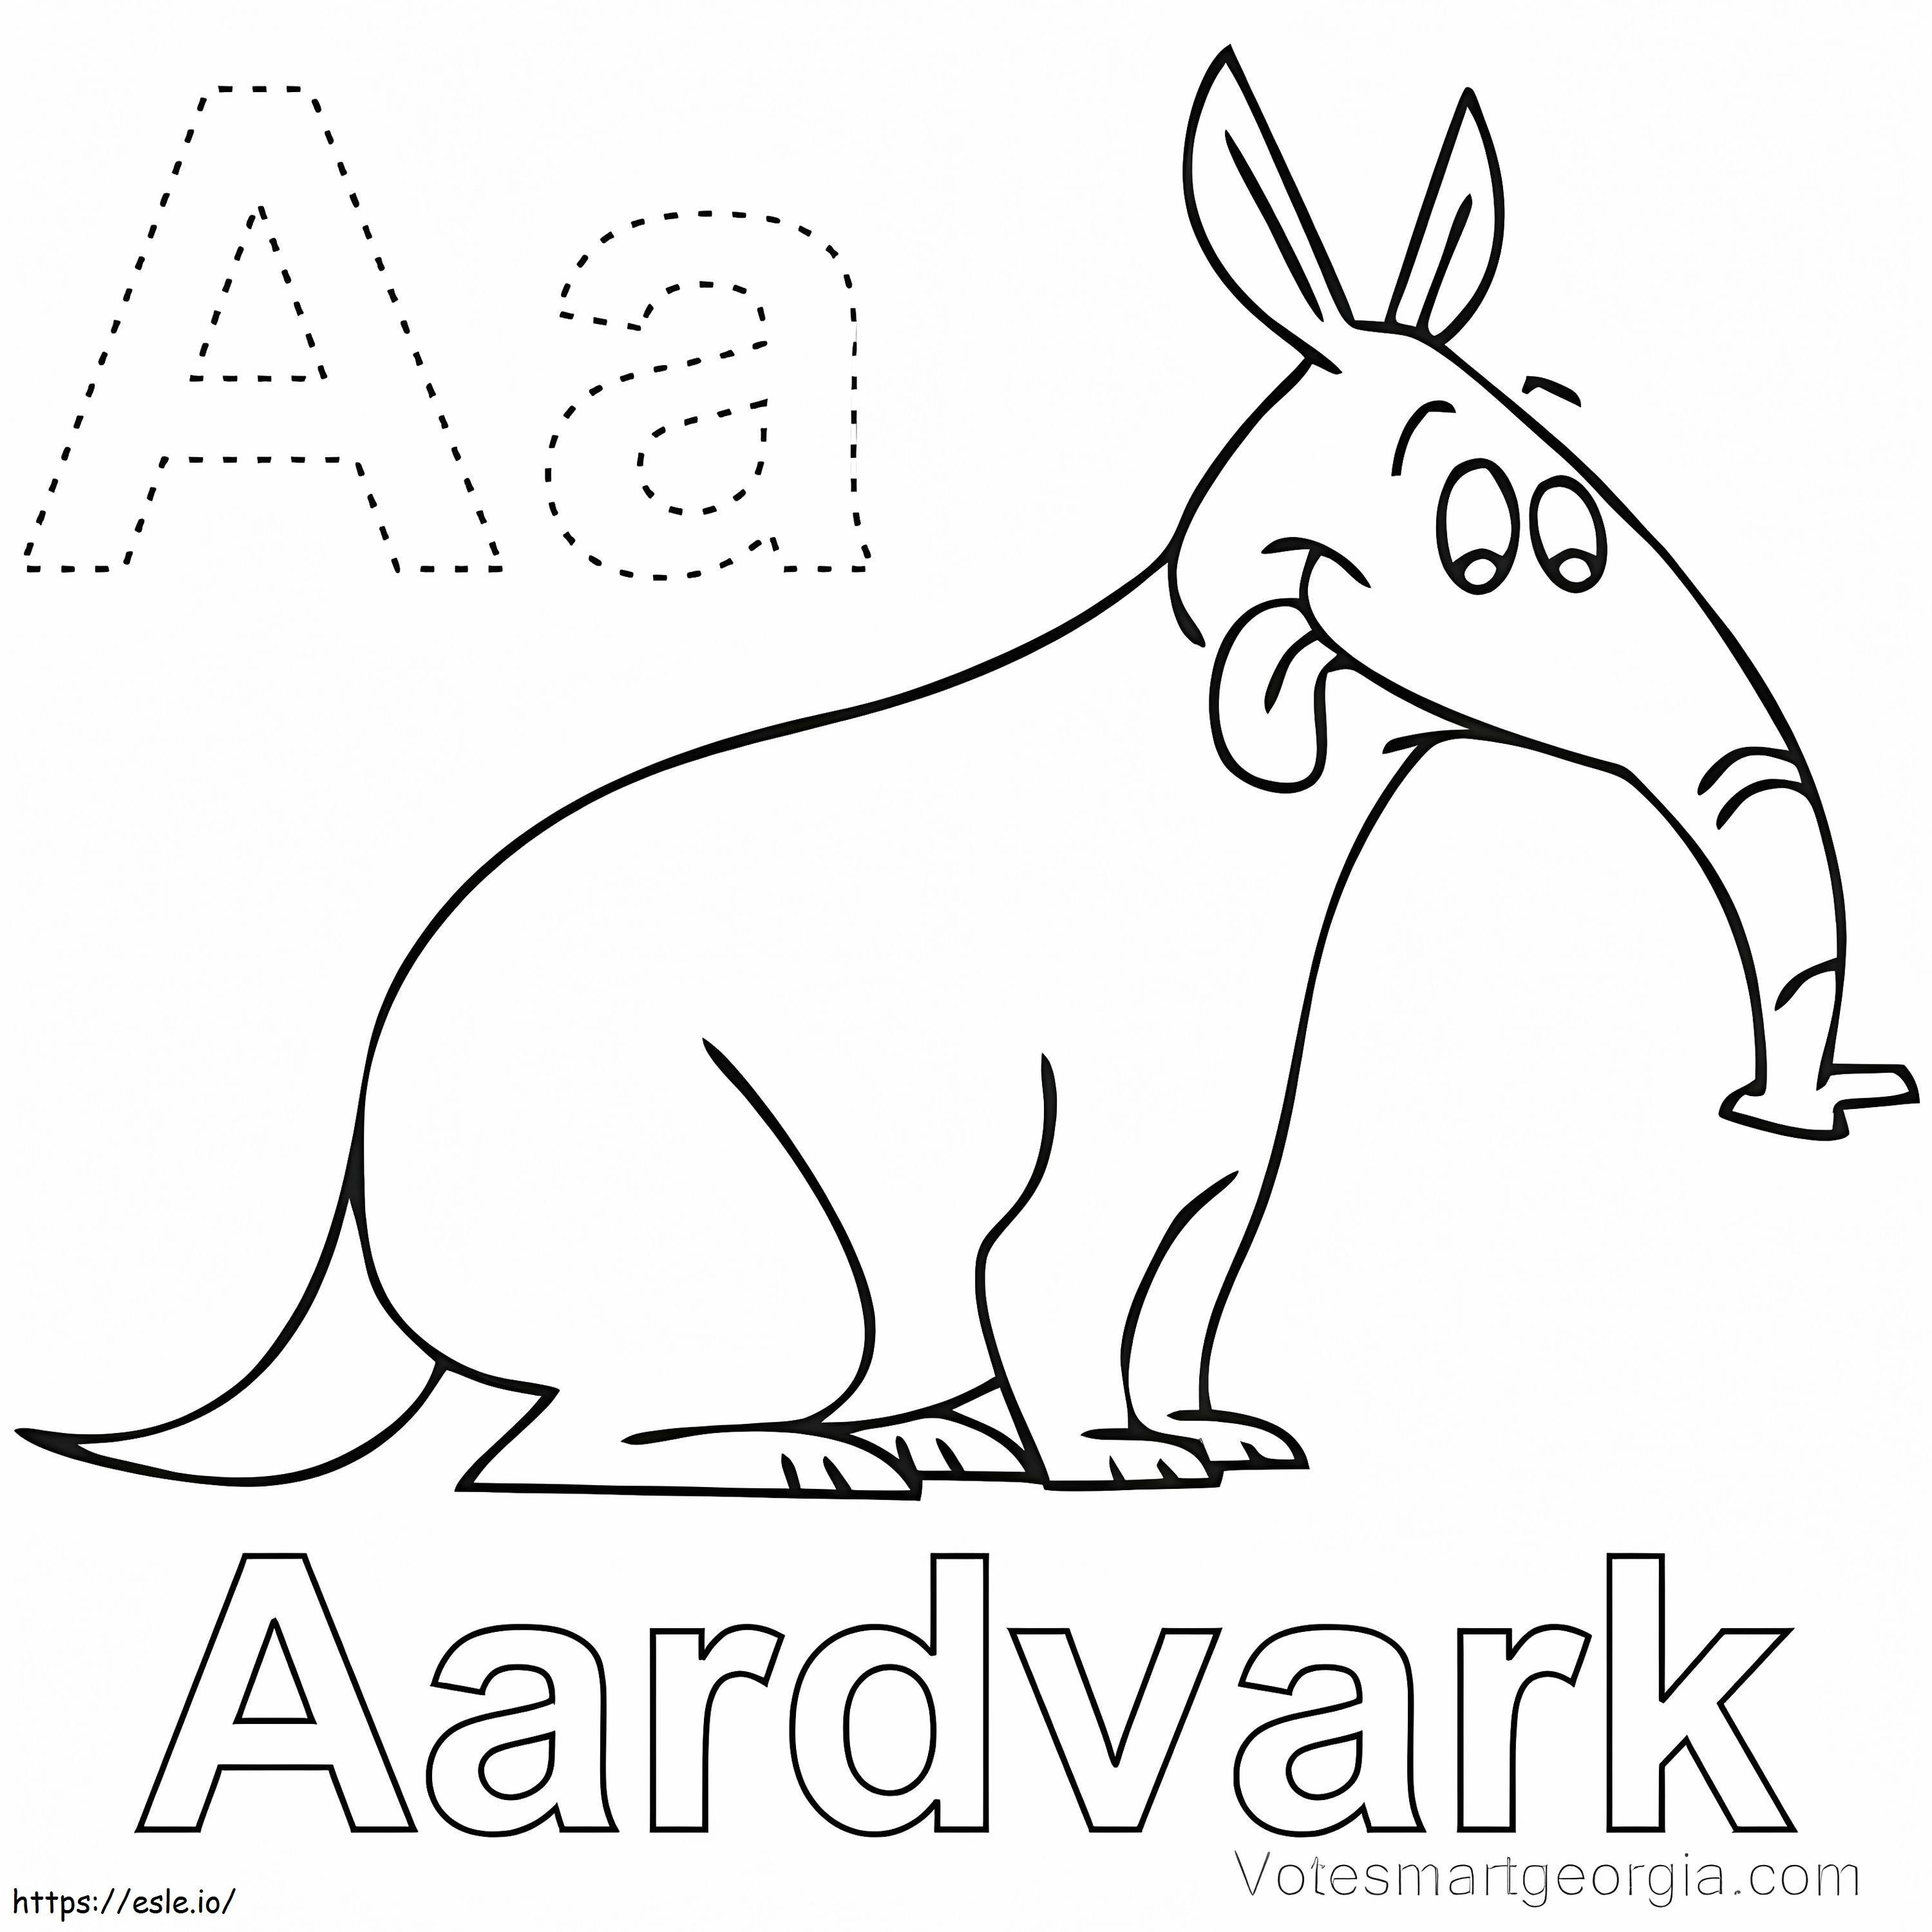 Aardvark Letra A coloring page